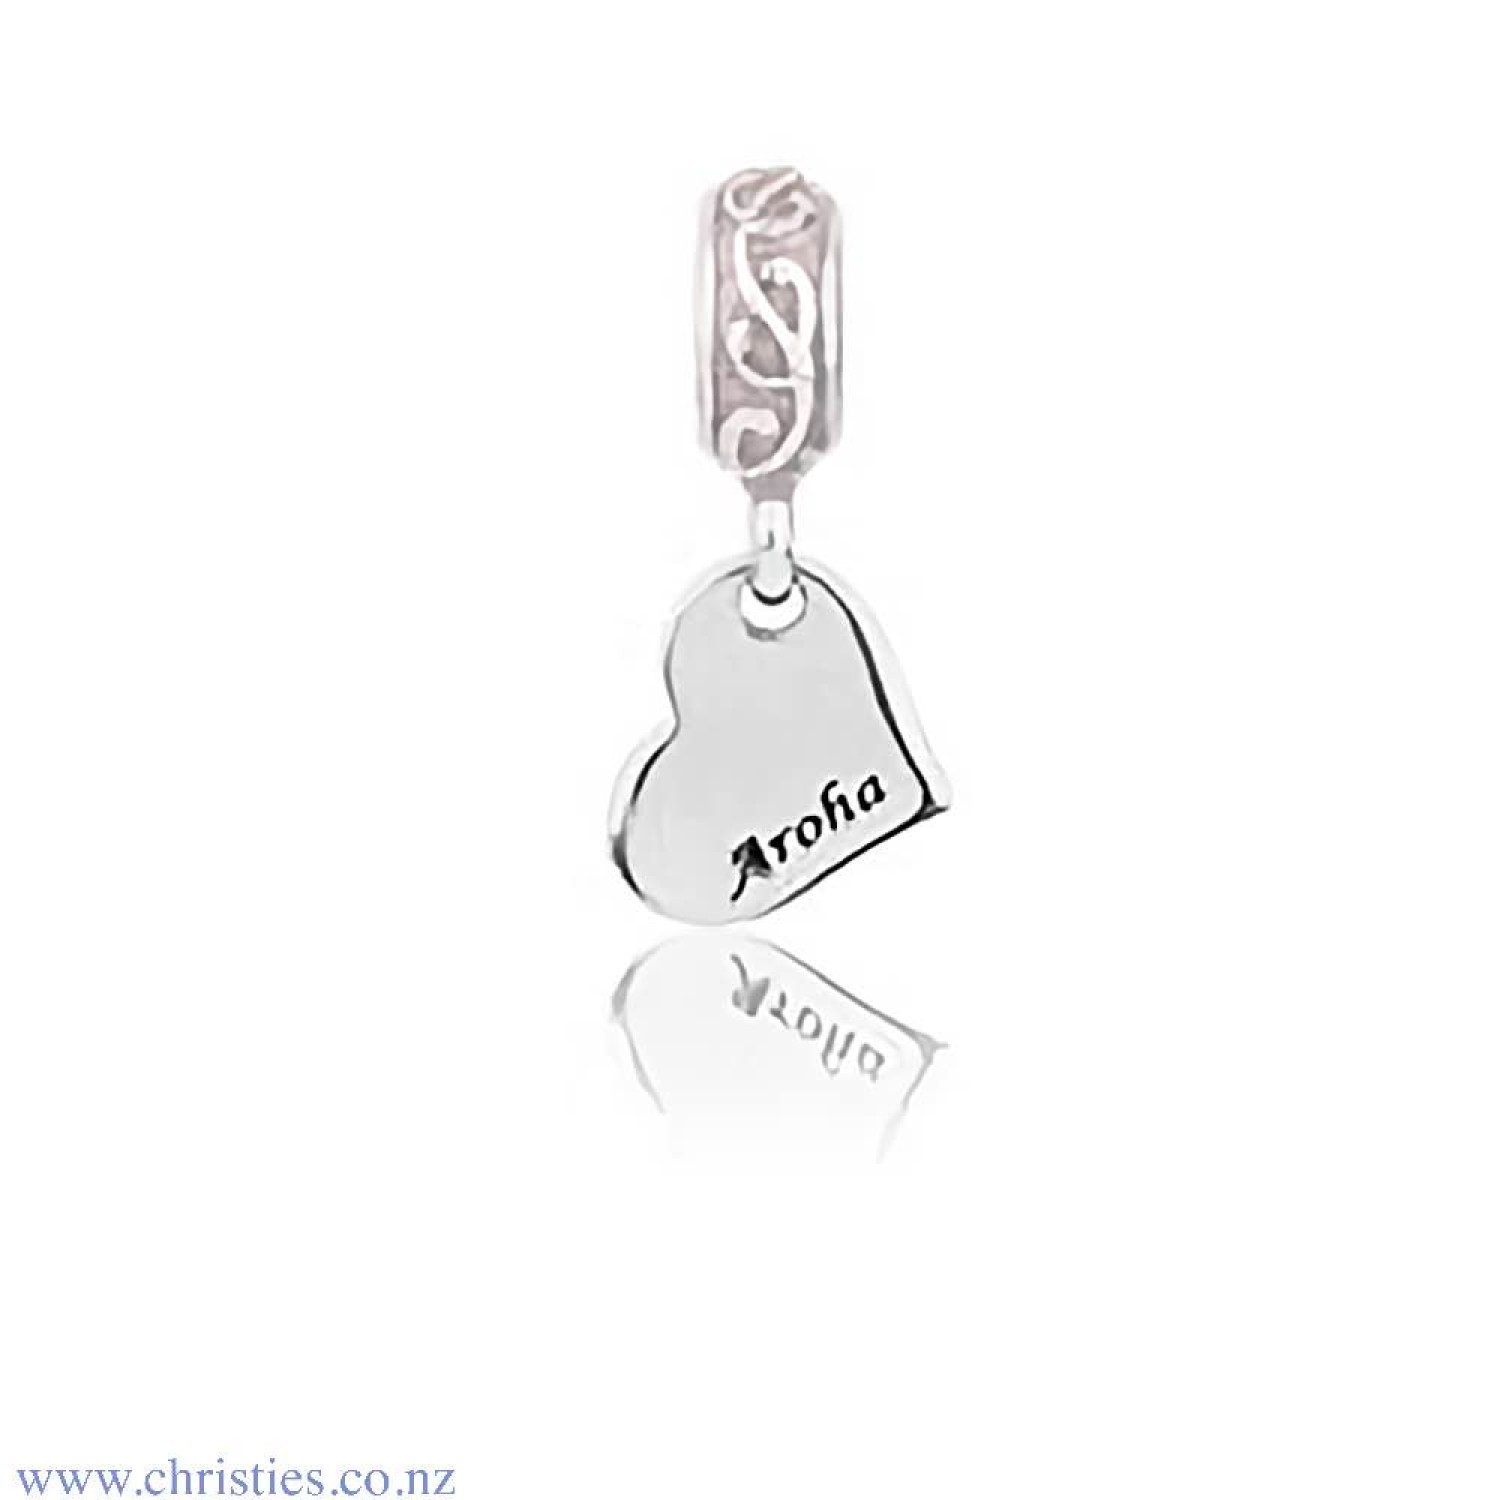 LKD050 Evolve Jewellery Aroha Deep Love Pendant Pink Charm. Aroha is often translated as “Love”, but the full meaning of the word encompasses all of the five senses, the ego and also intellect, and cannot be contained in just one word.   The Aroha pendant